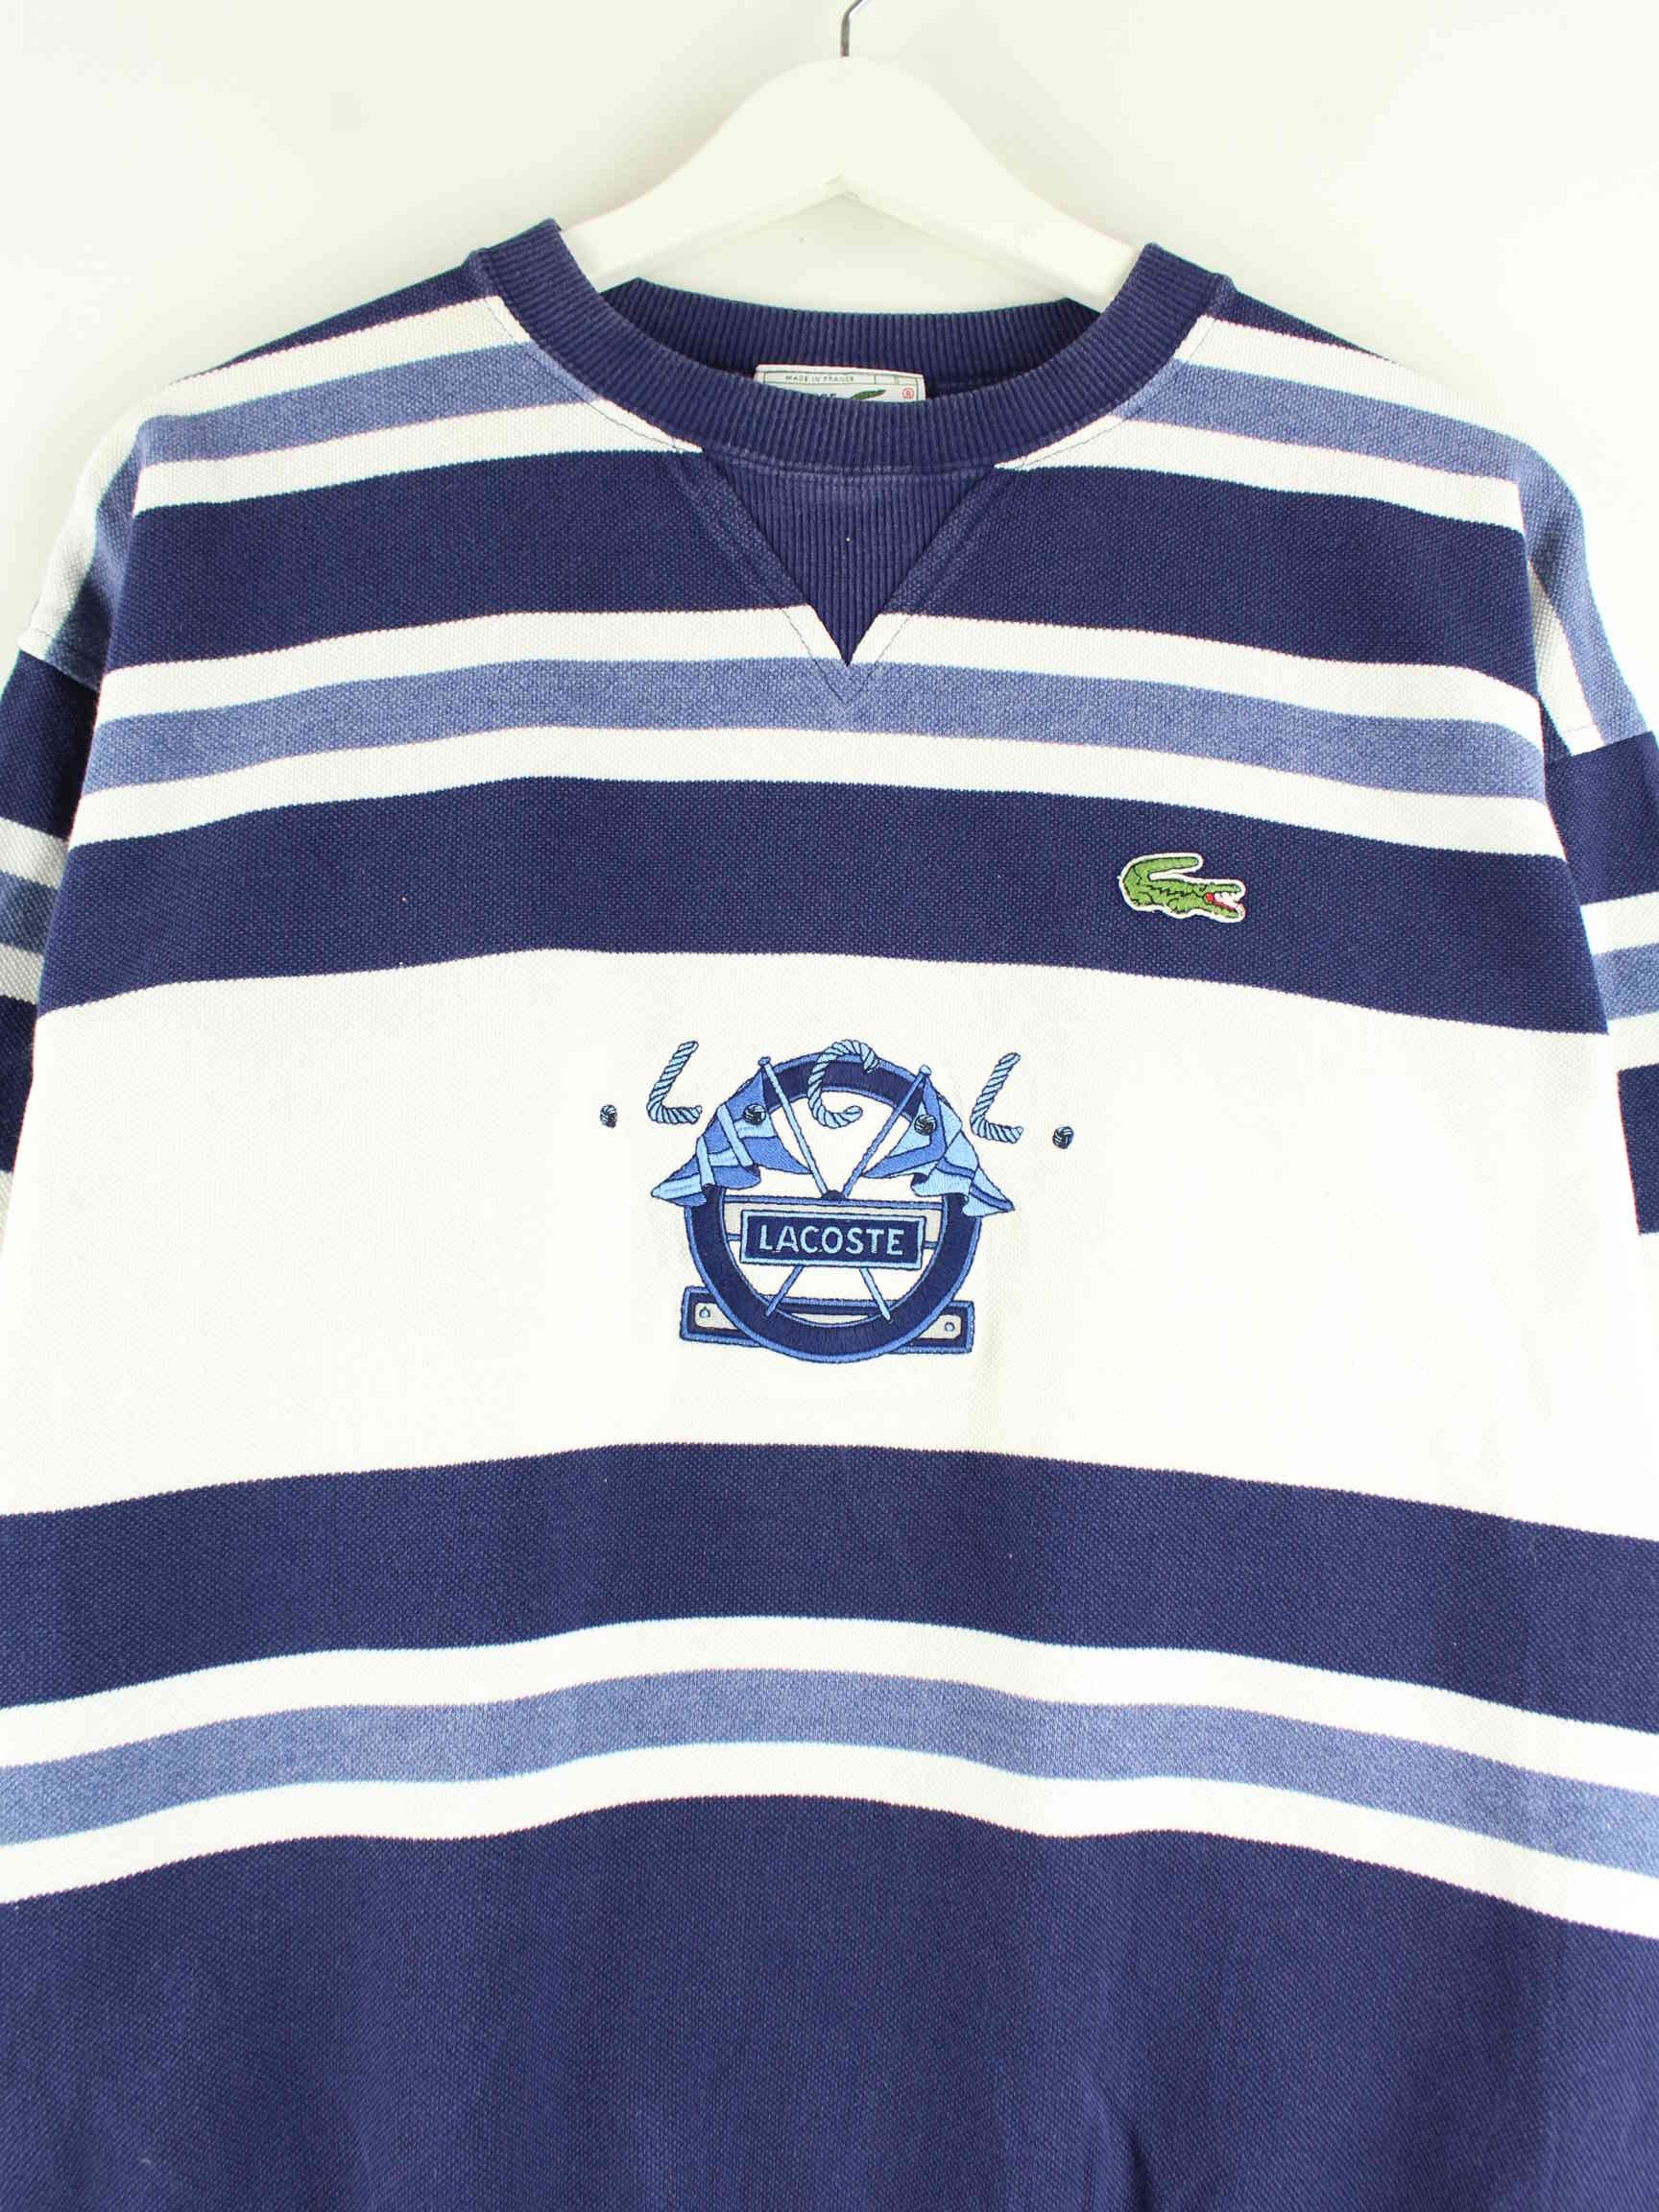 Lacoste 90s Vintage Sail Embroidered Sweater Blau S (detail image 1)